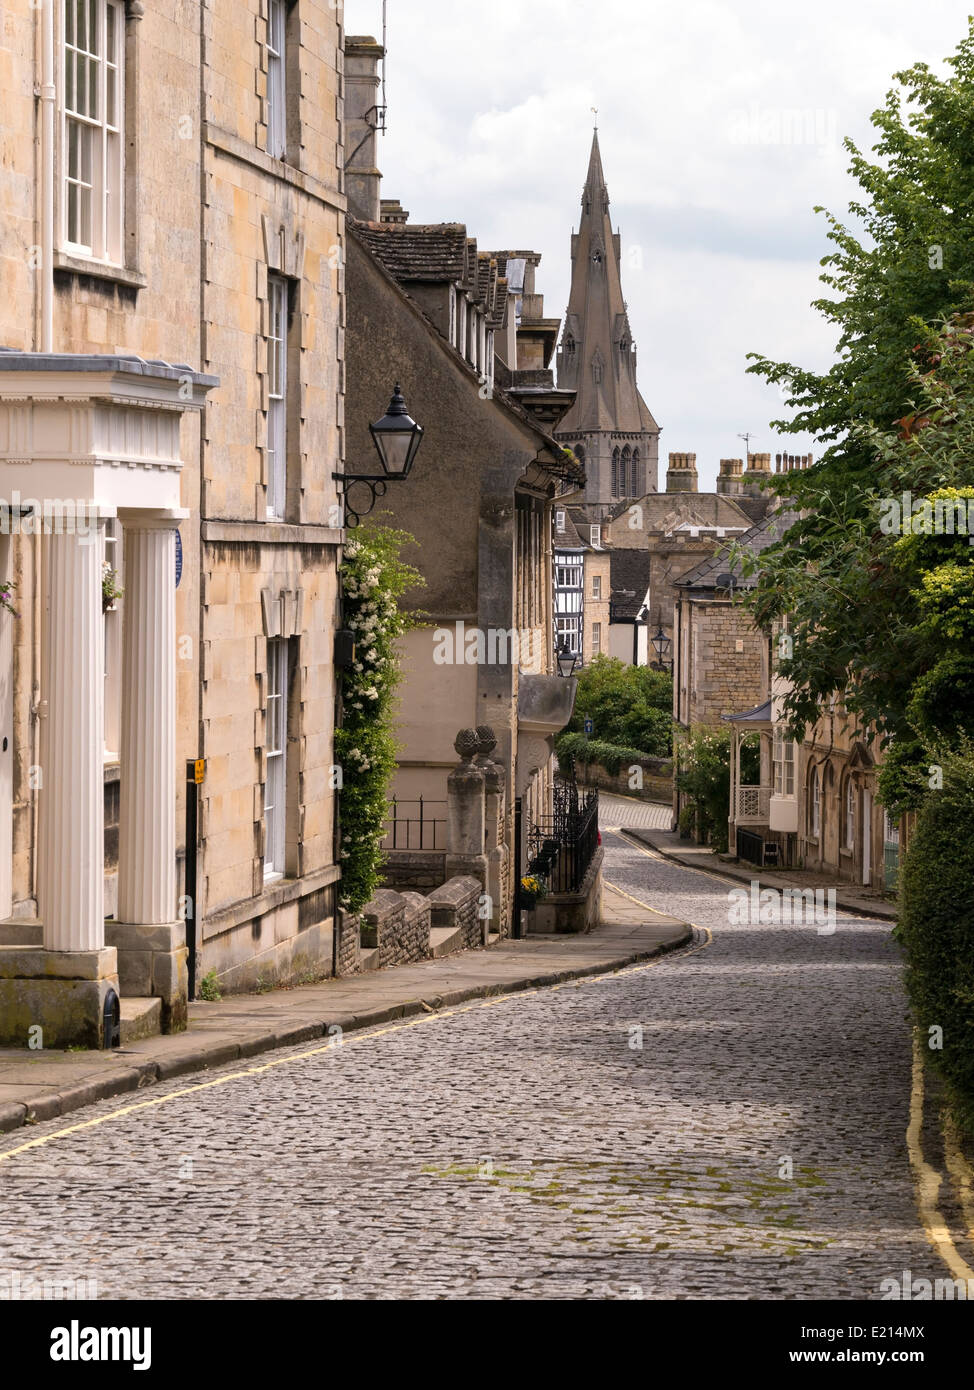 Old narrow cobbled street with stone houses, Barn Hill and All Saints Place, Stamford, Lincolnshire, England,UK Stock Photo